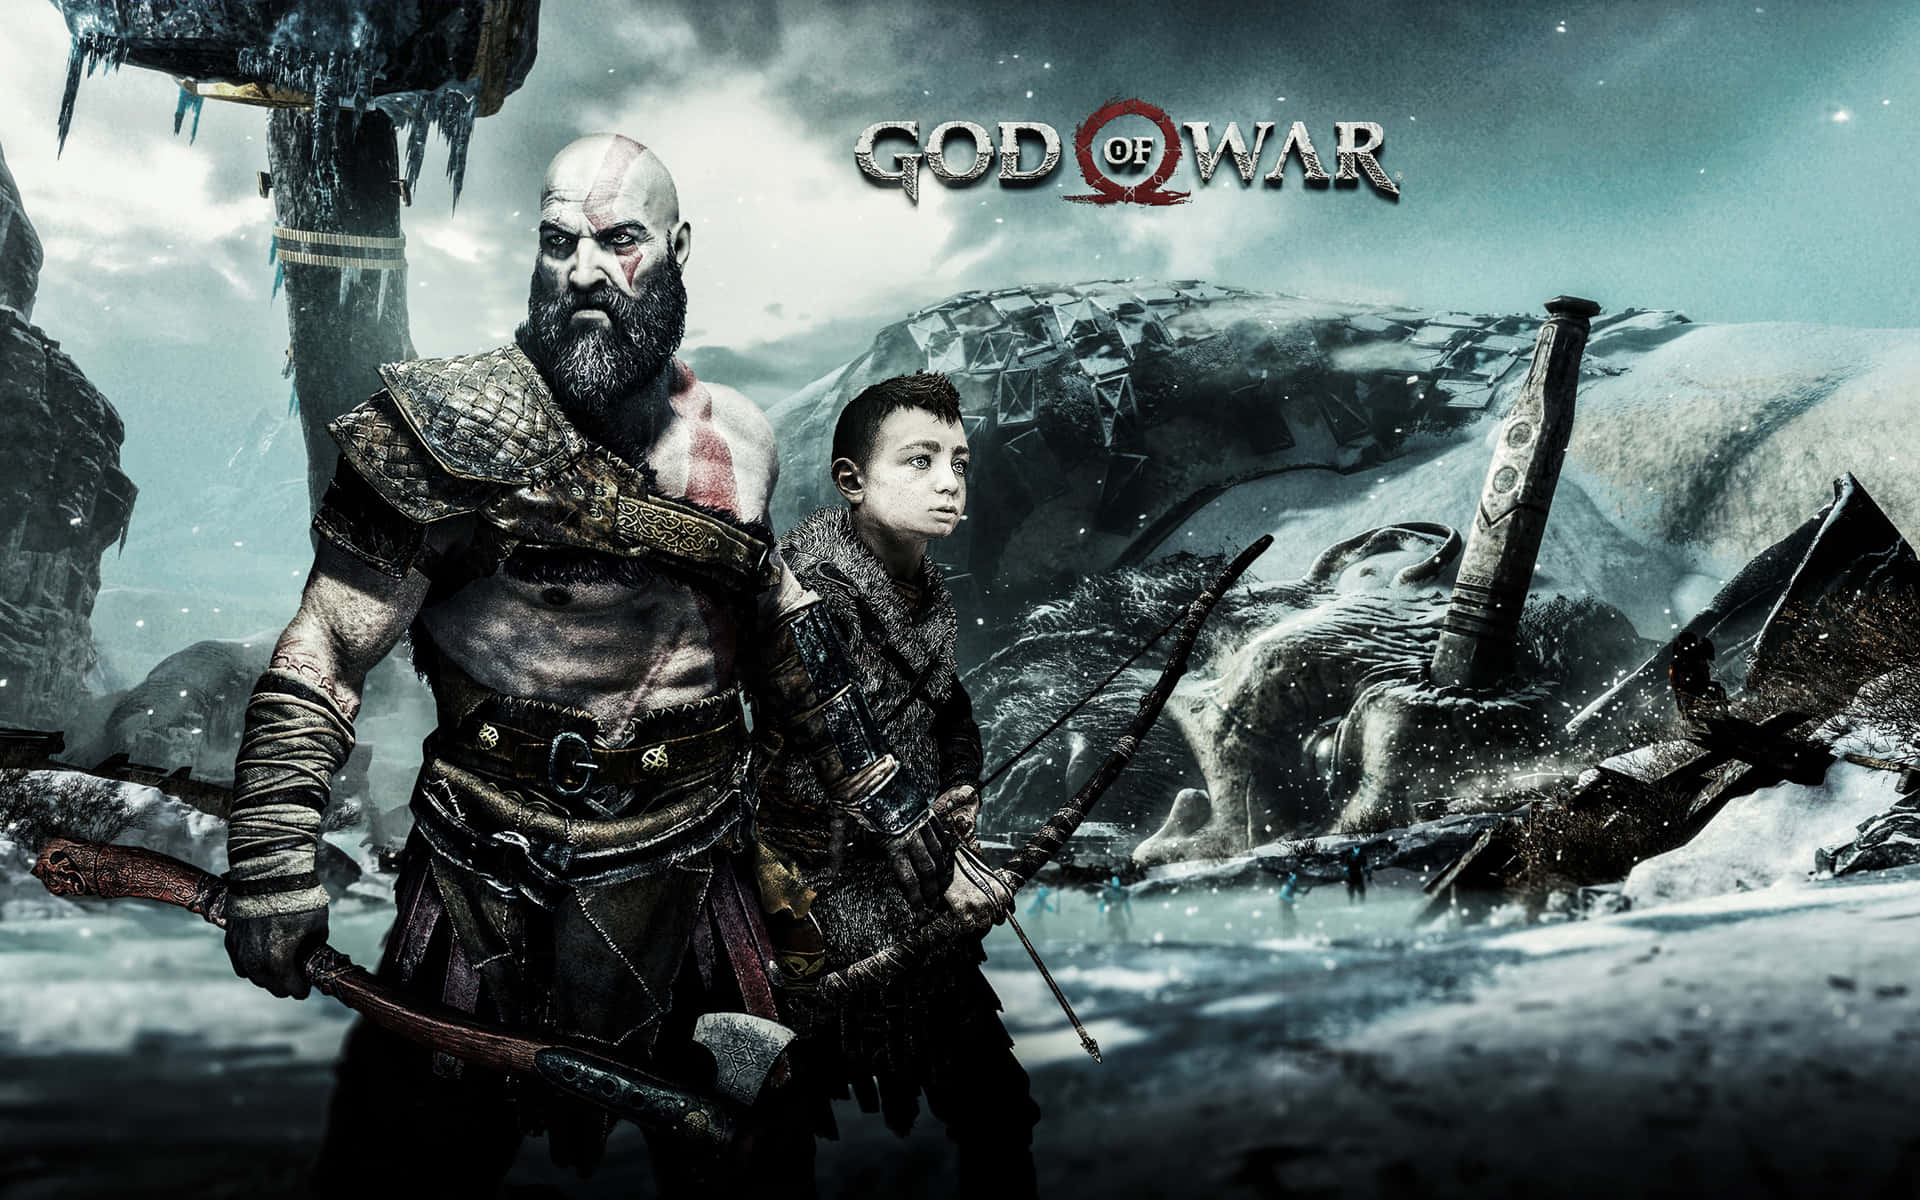 Caption: Kratos and Atreus, the Legendary Father-Son Duo in the World of Norse Mythology